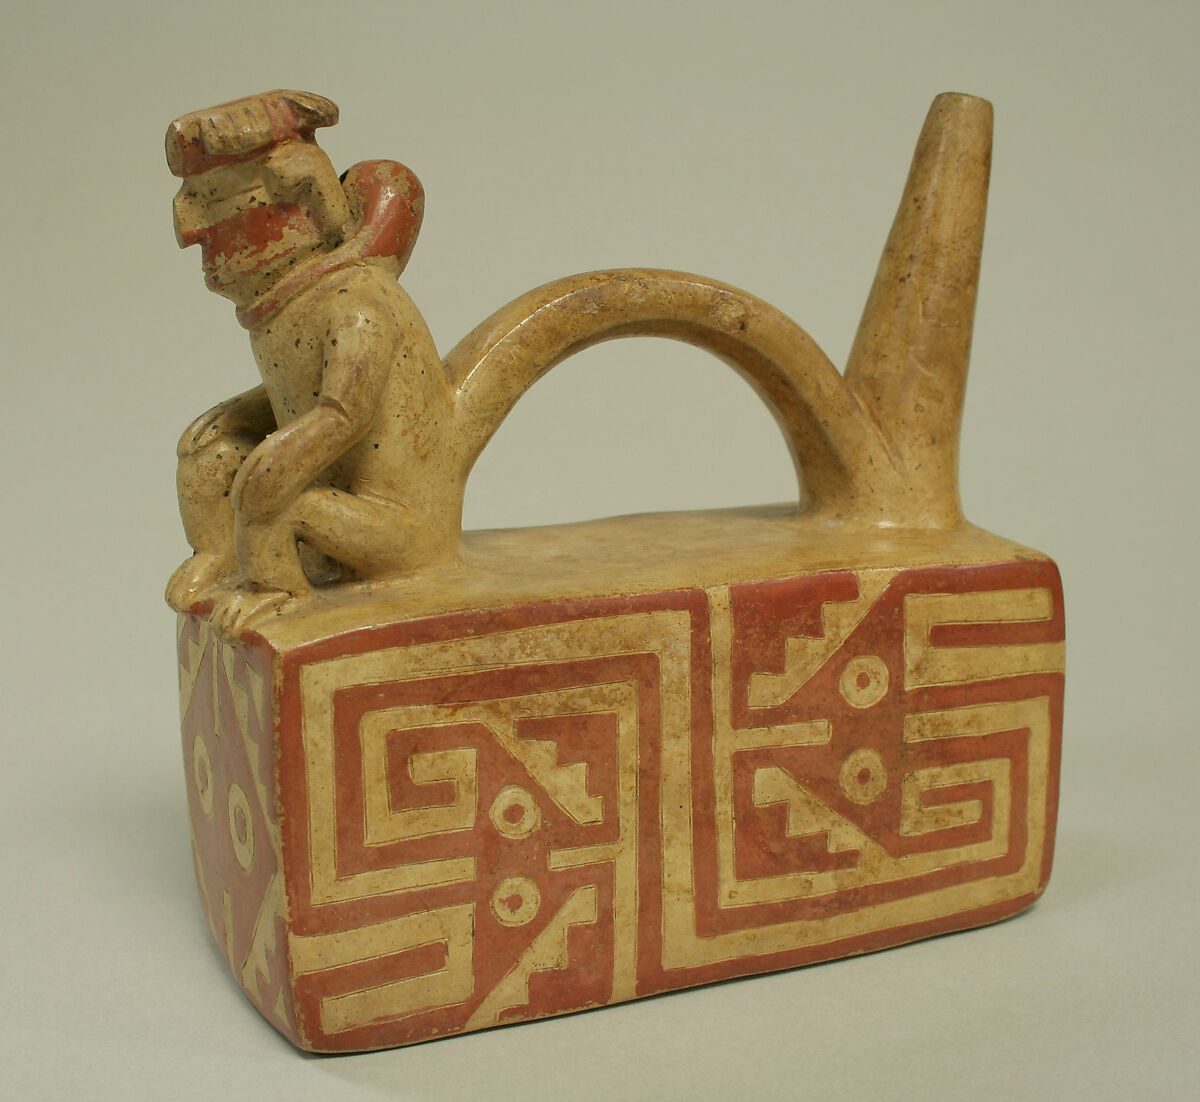 Bridge and Spout Bottle with Figure on Throne, Ceramic, Viru 